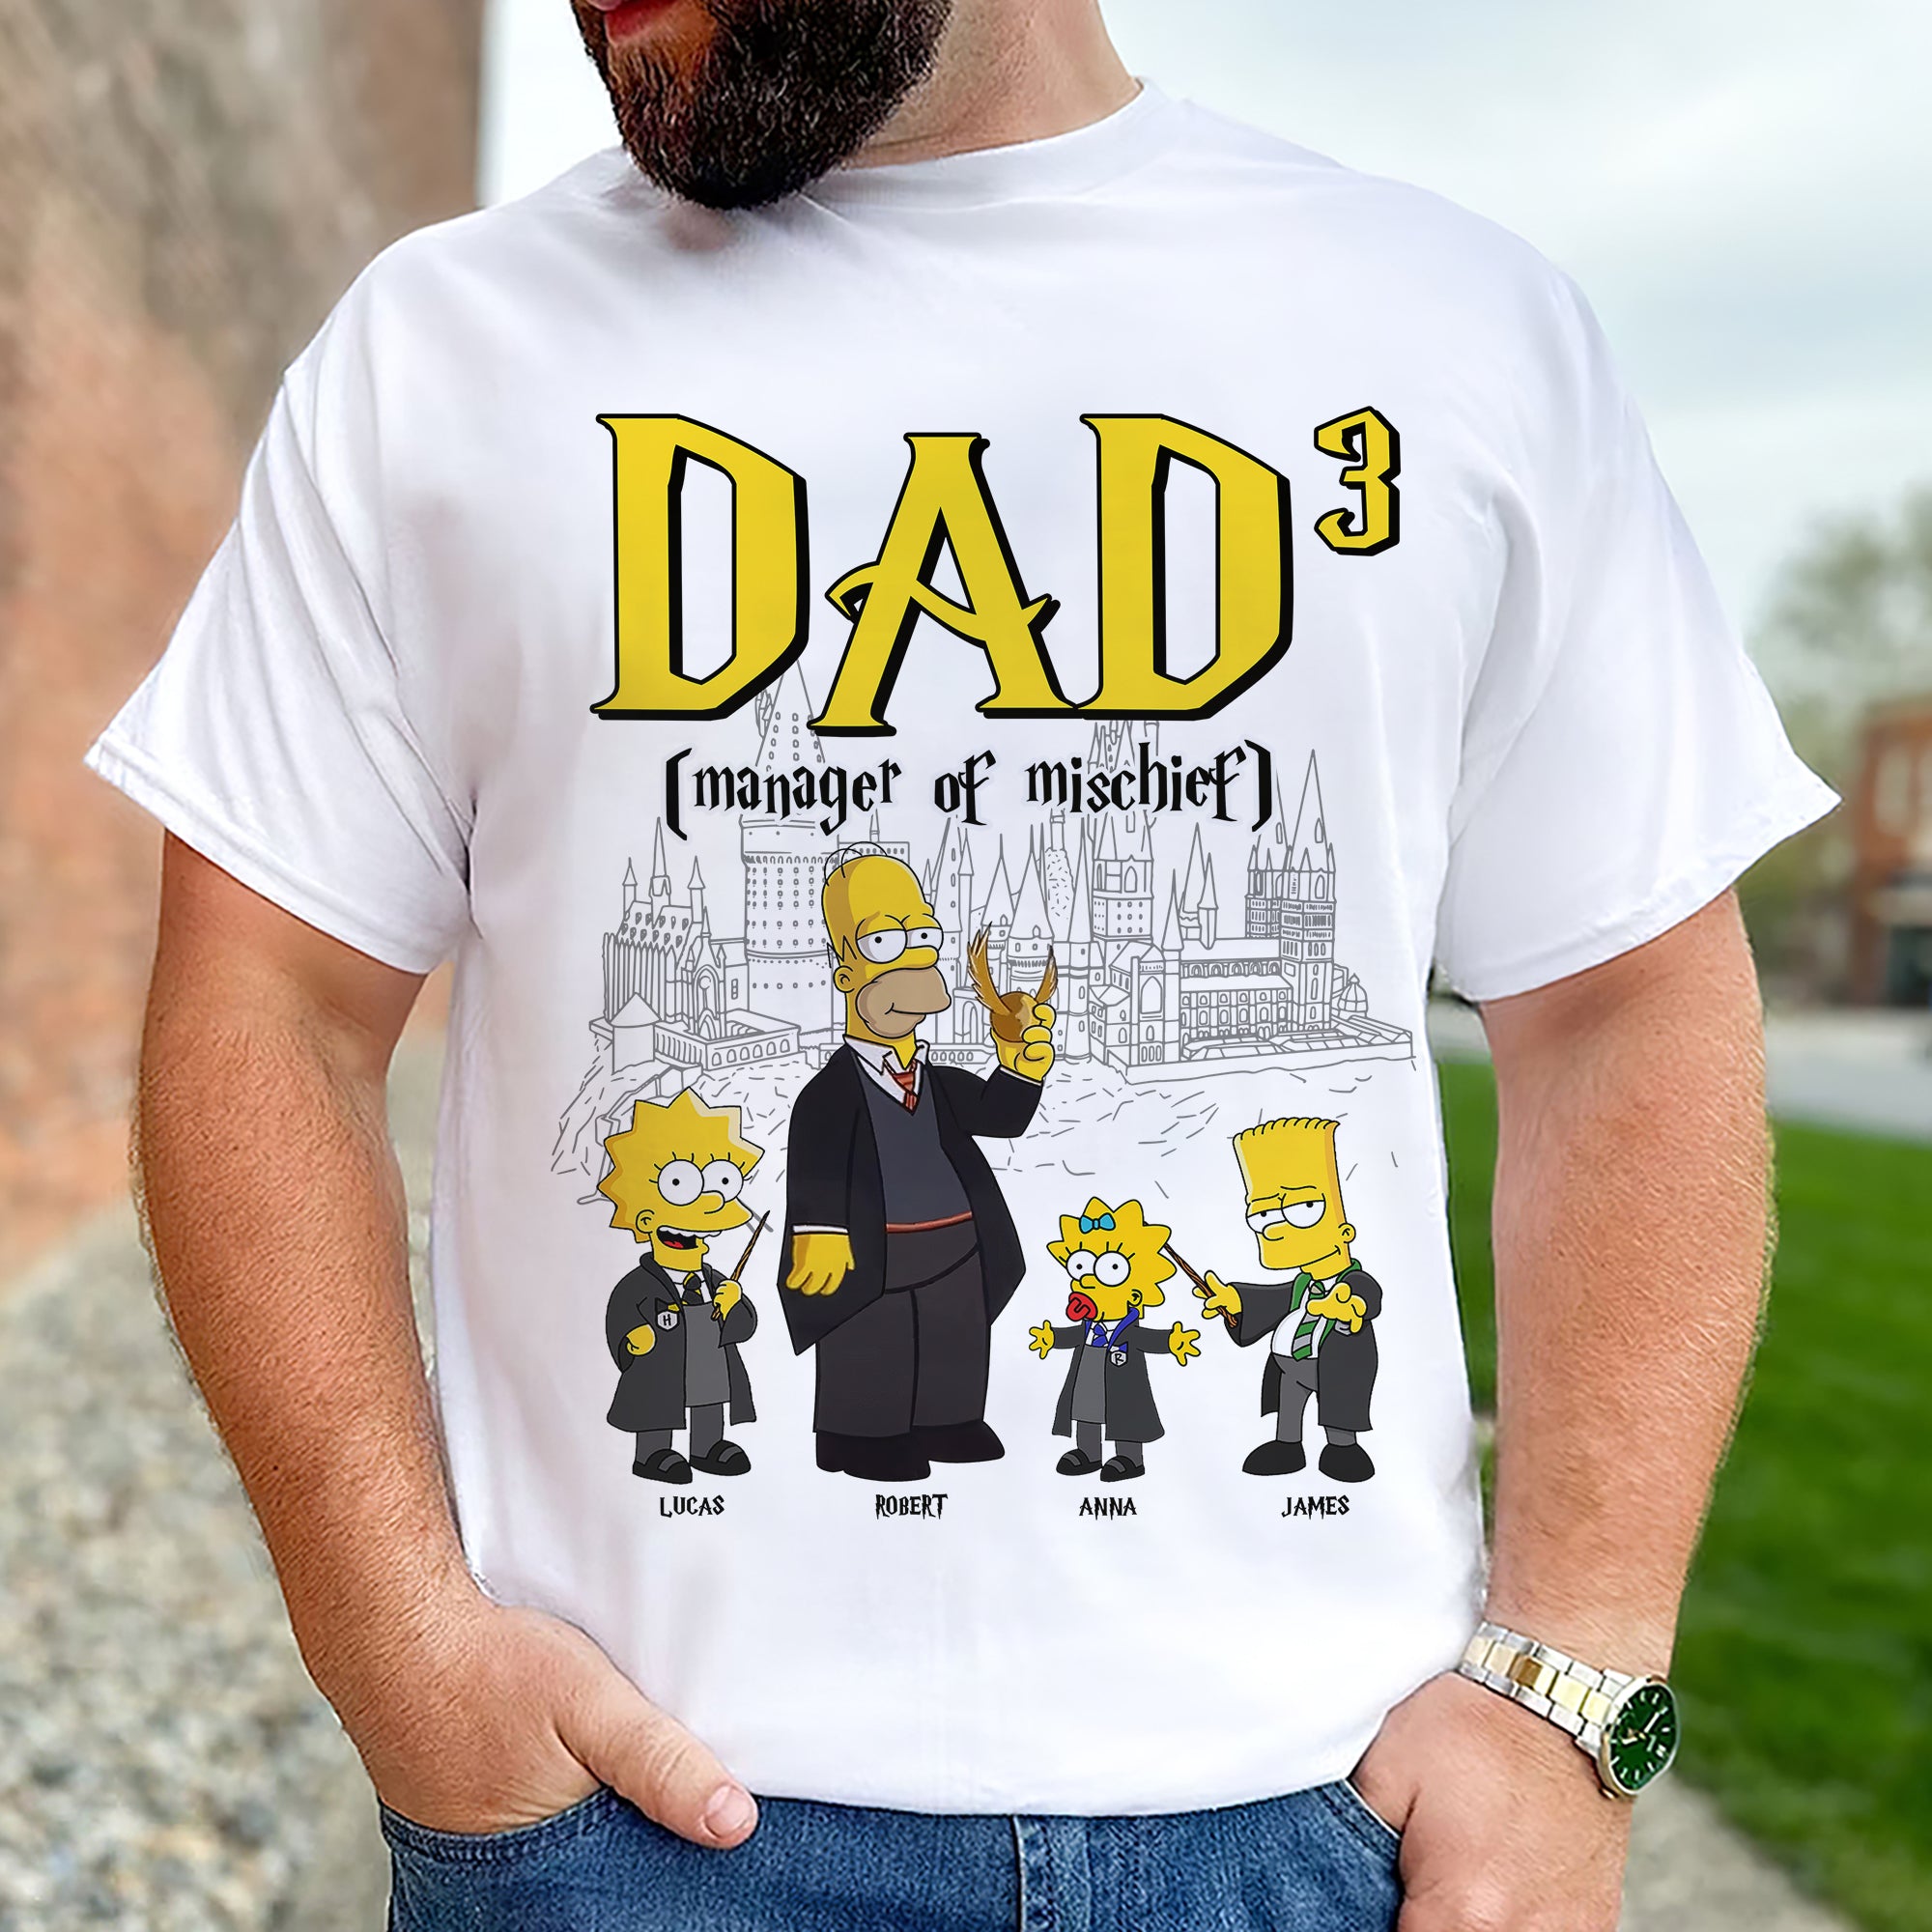 Personalized Gifts For Dad Shirt 01huti180524 Father's Day-Homacus